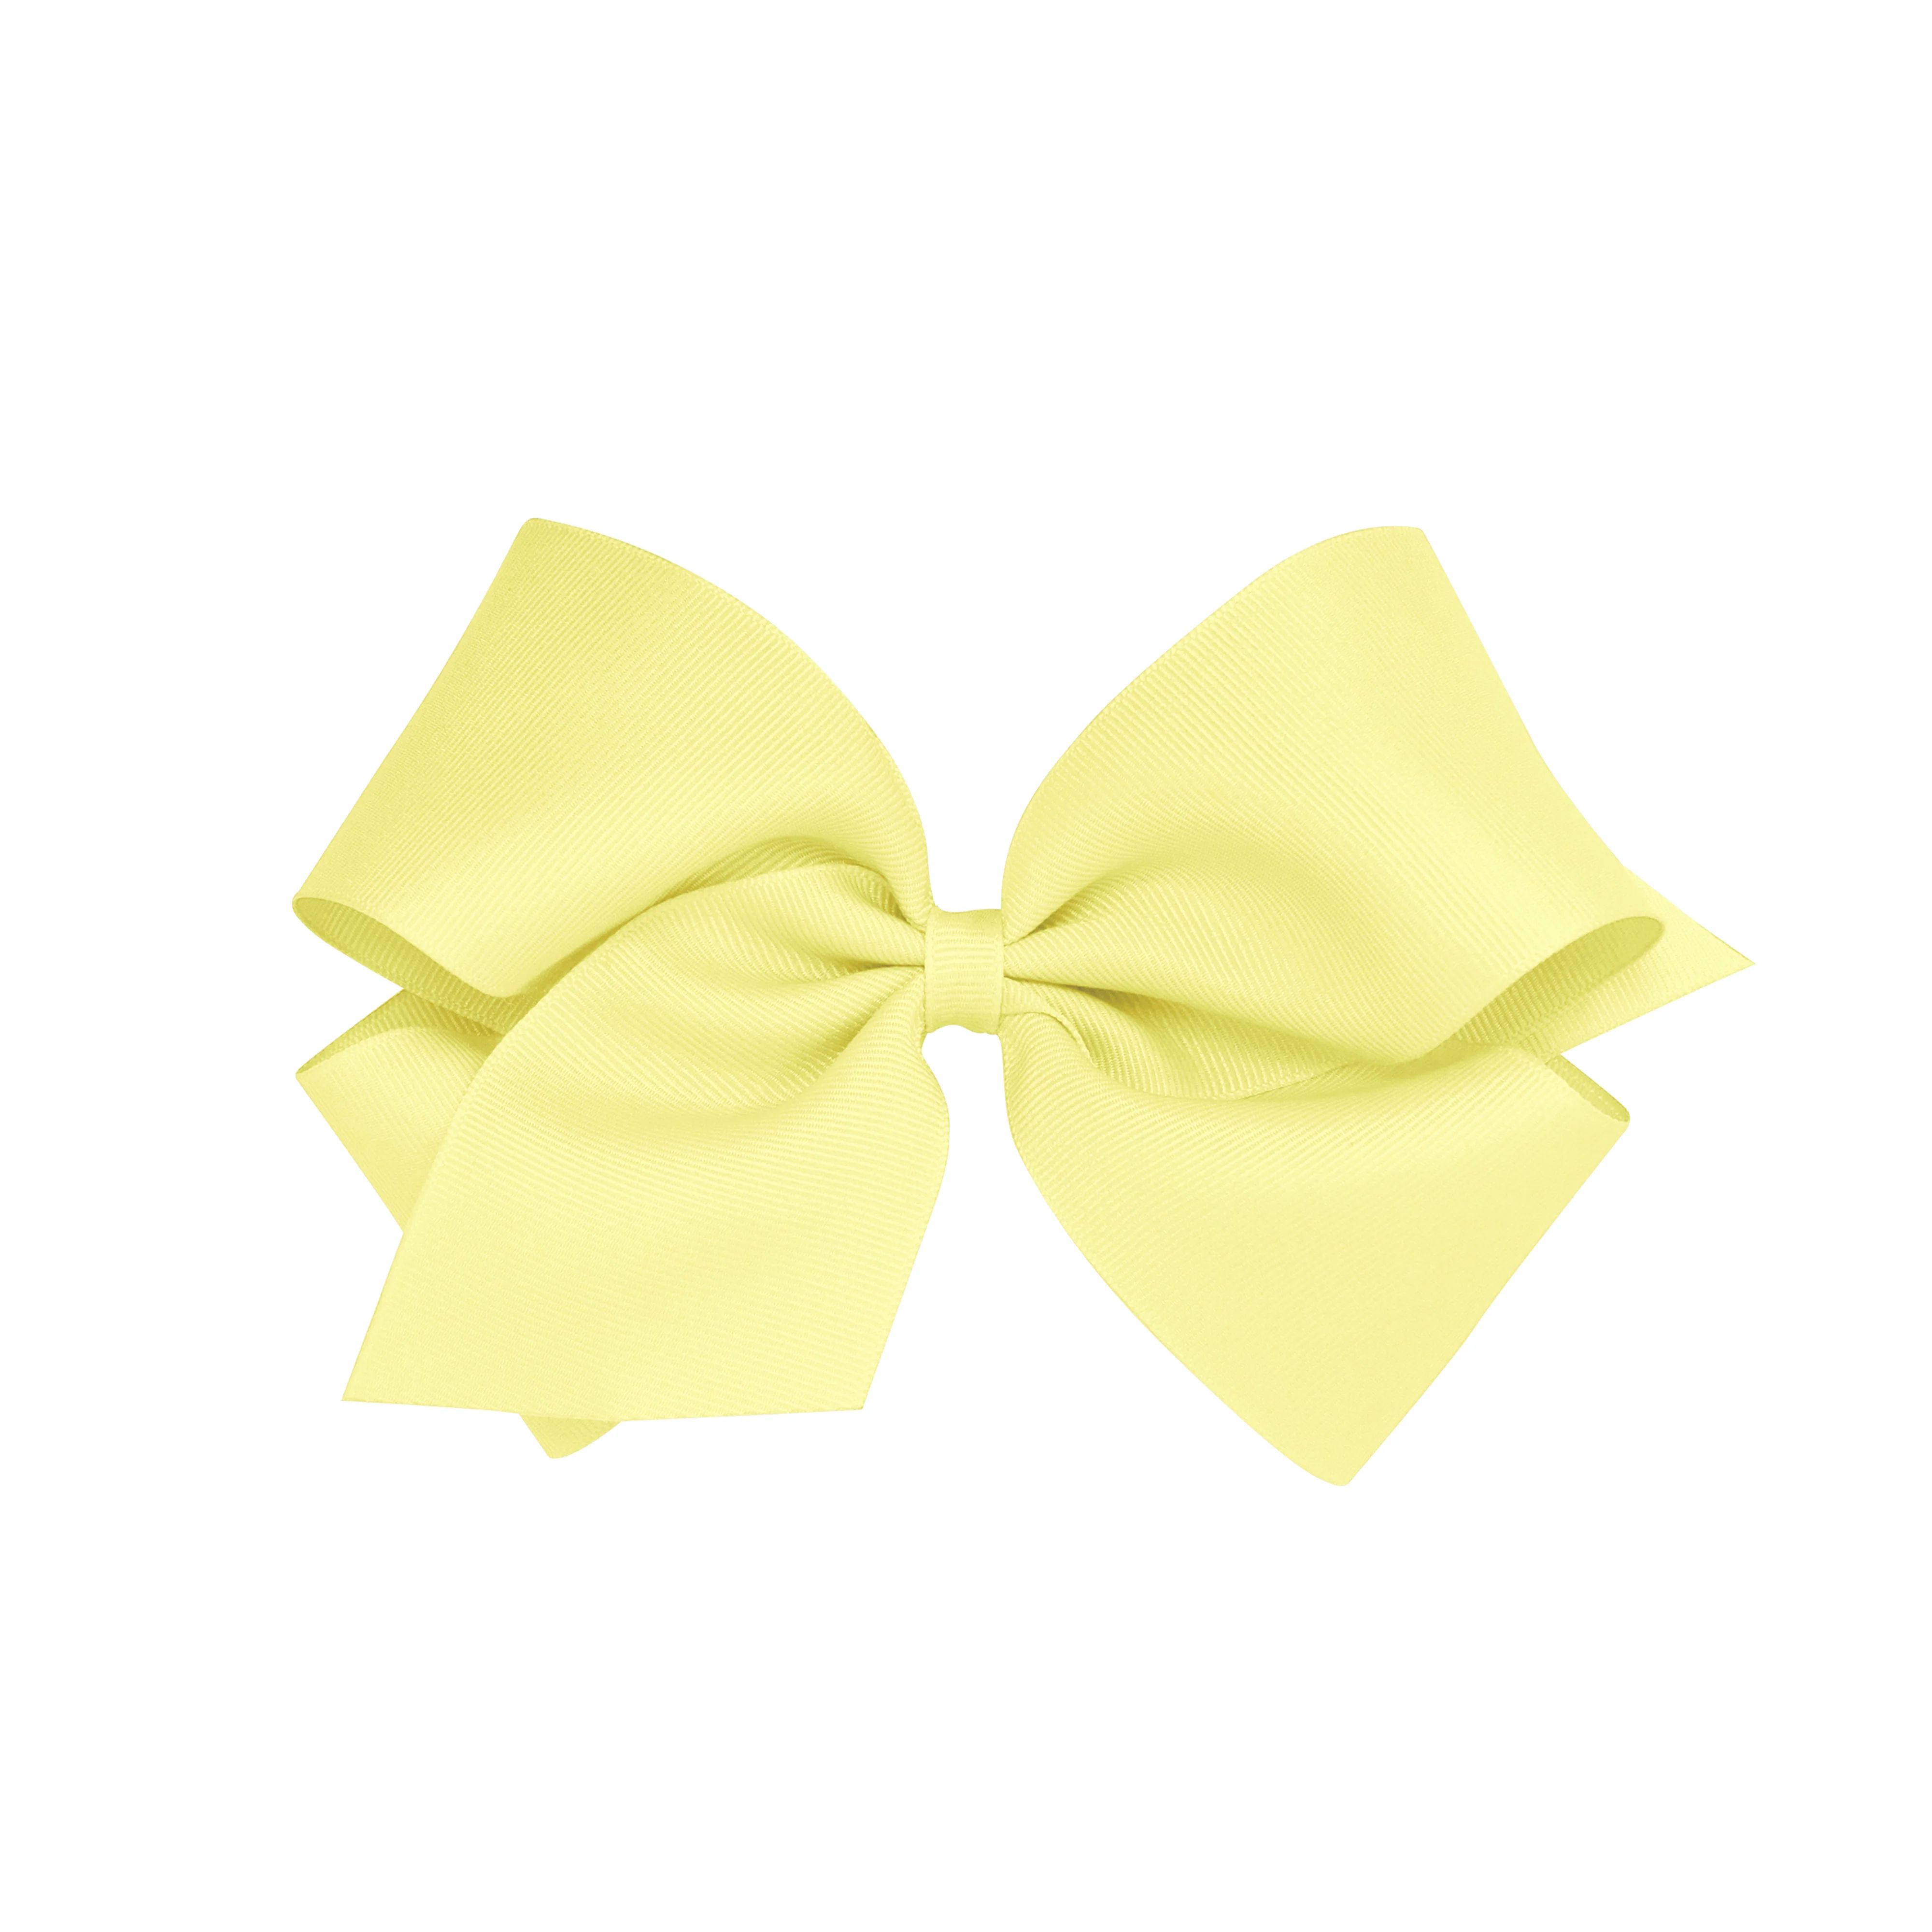 Wee Ones King Grosgrain Hair Bow - More Colors | The Beaufort Bonnet Company